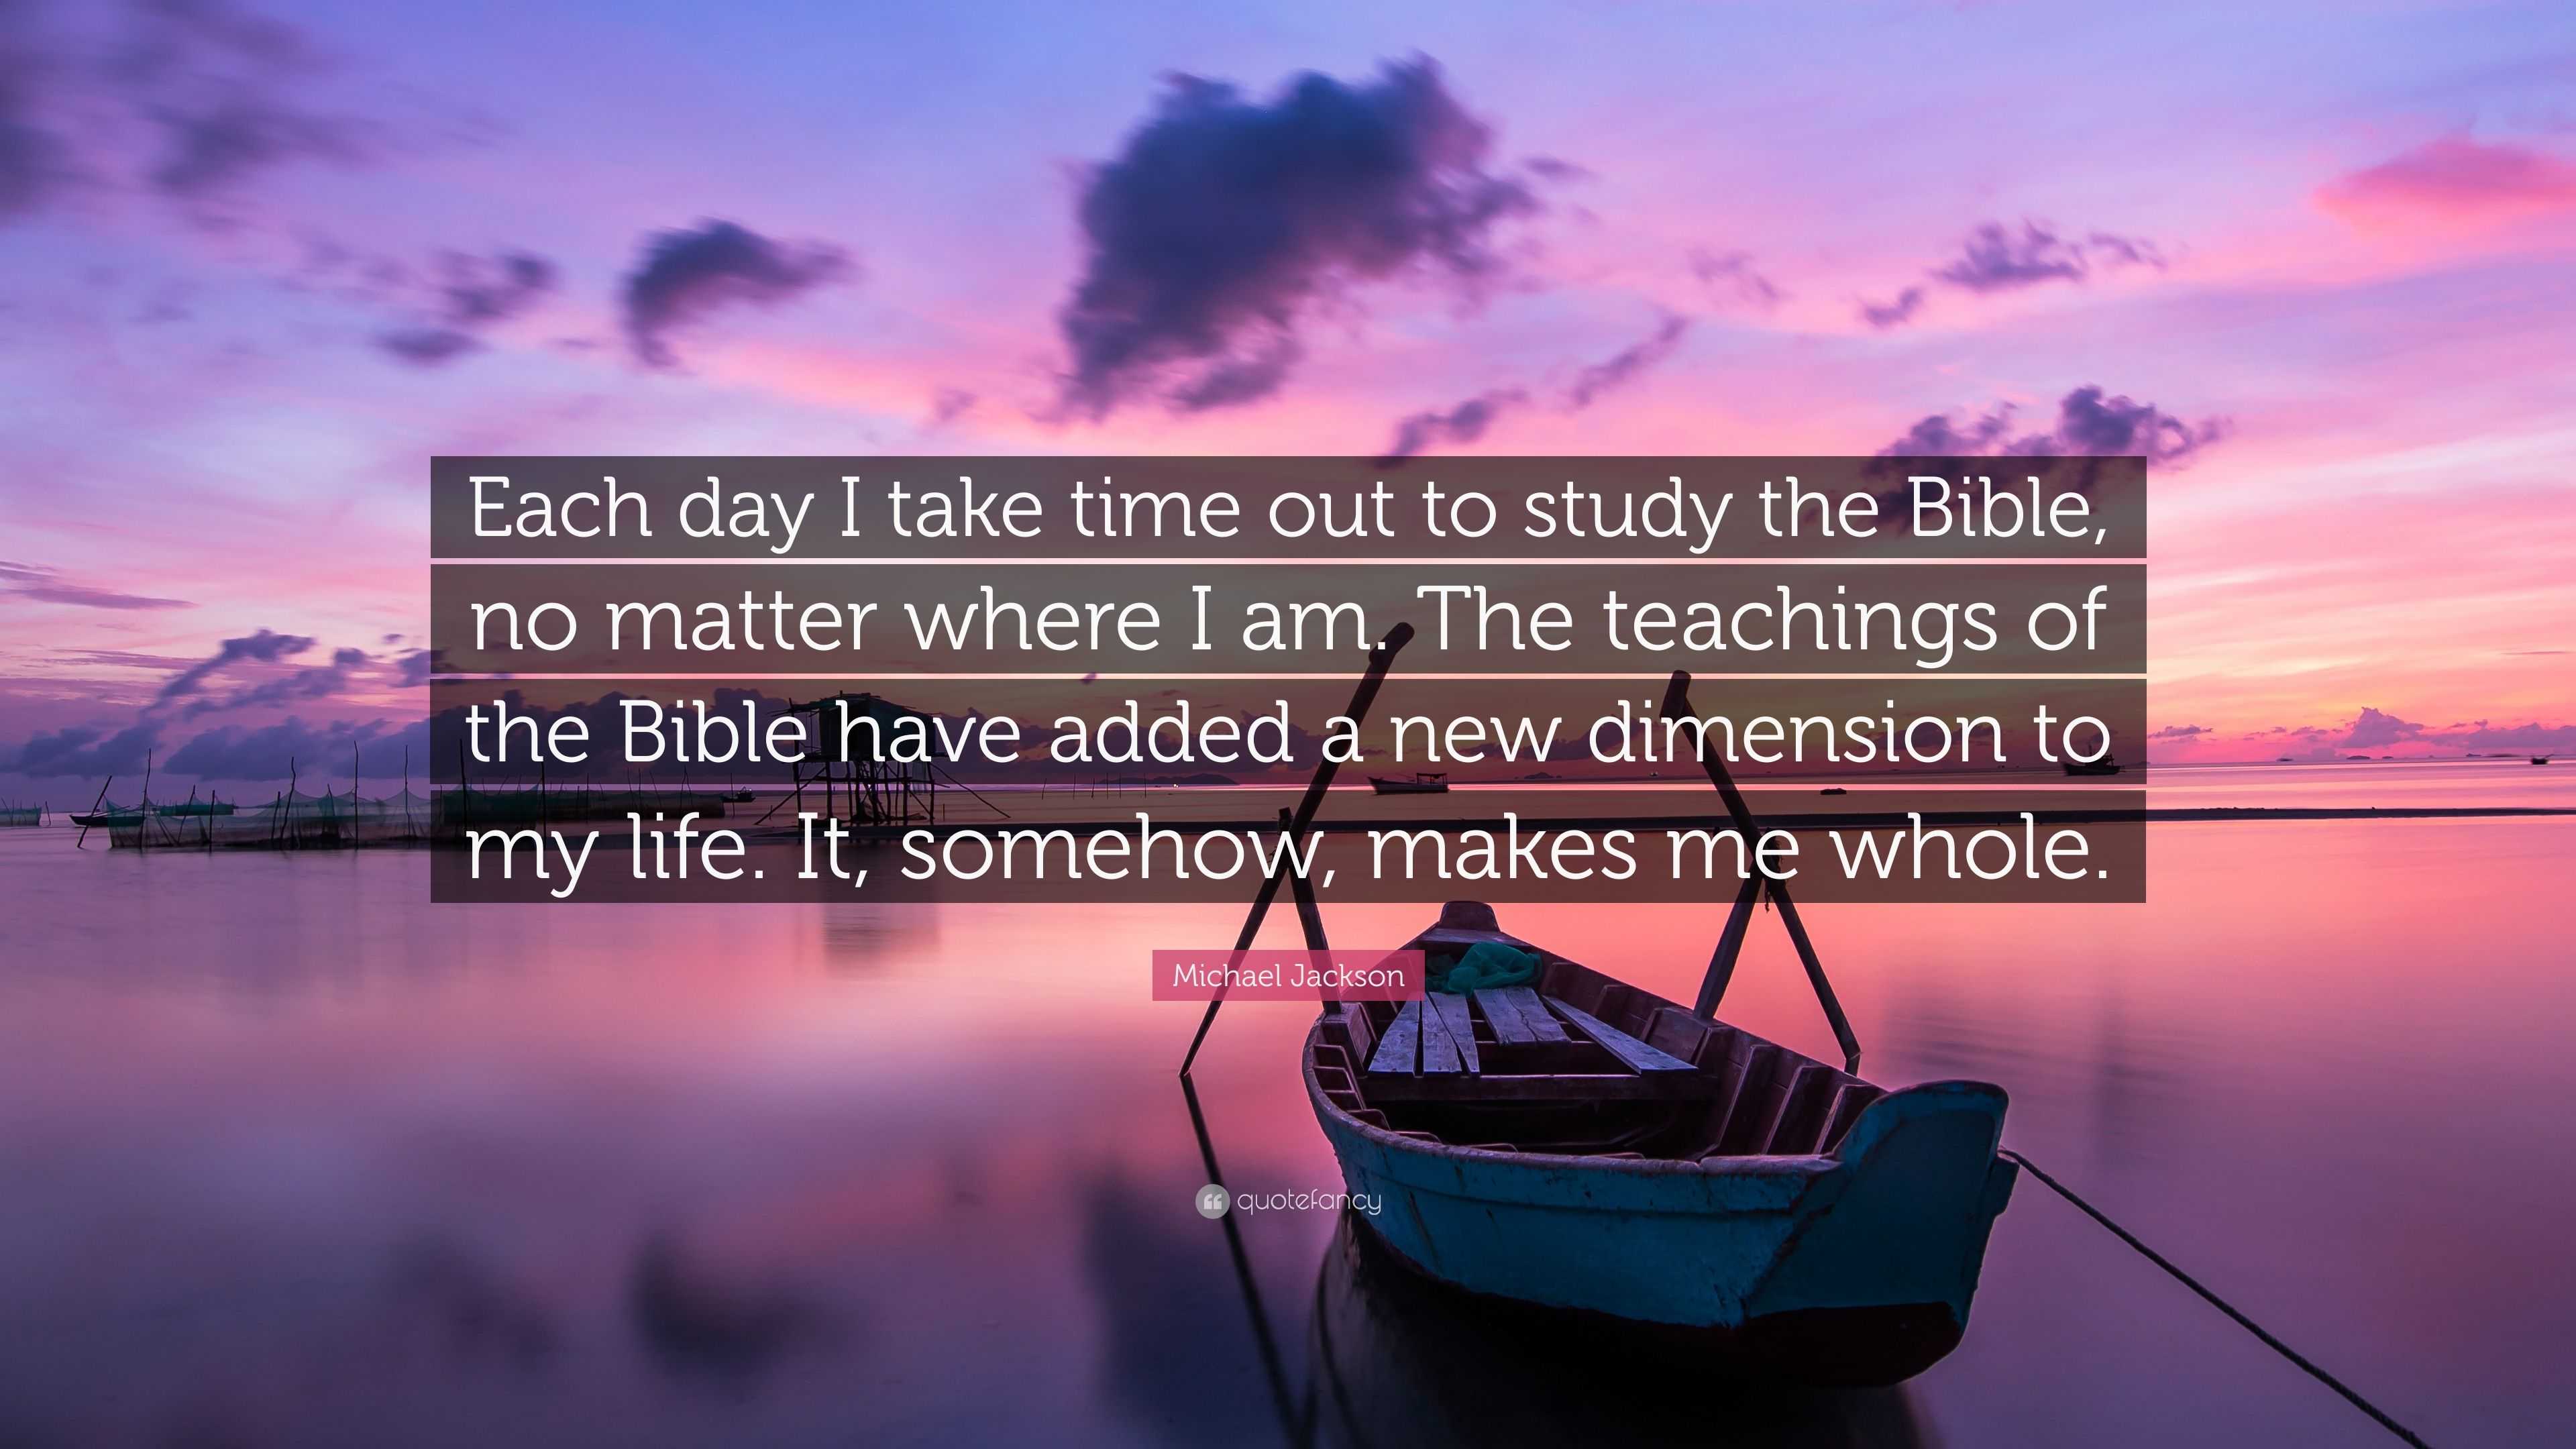 Michael Jackson Quote “Each day I take time out to study the Bible